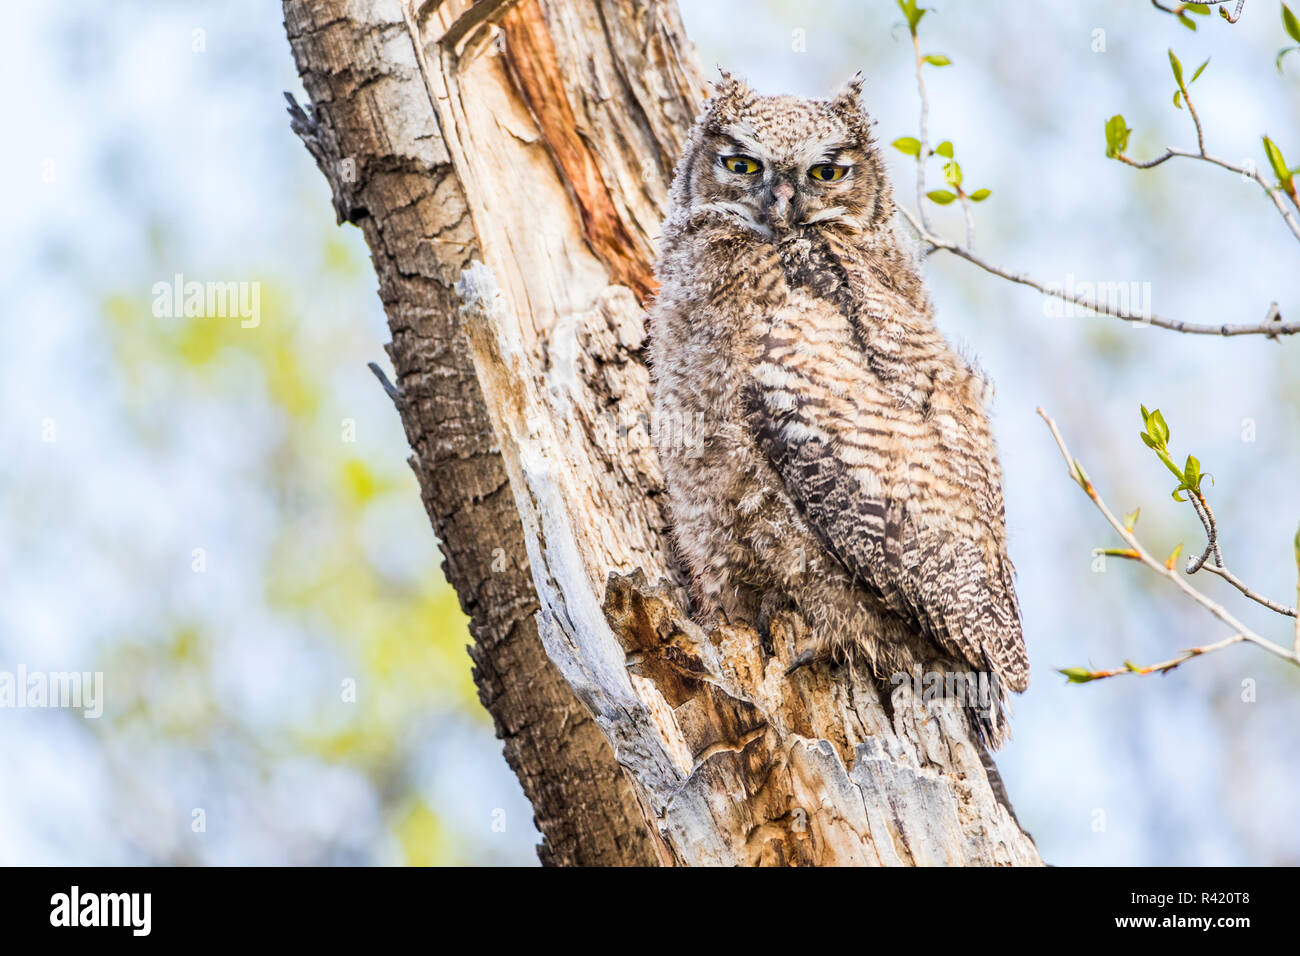 USA, Wyoming, Sublette County. Young Great Horned Owl recently left the nest and now sitting on a branch of a cottonwood tree. Stock Photo